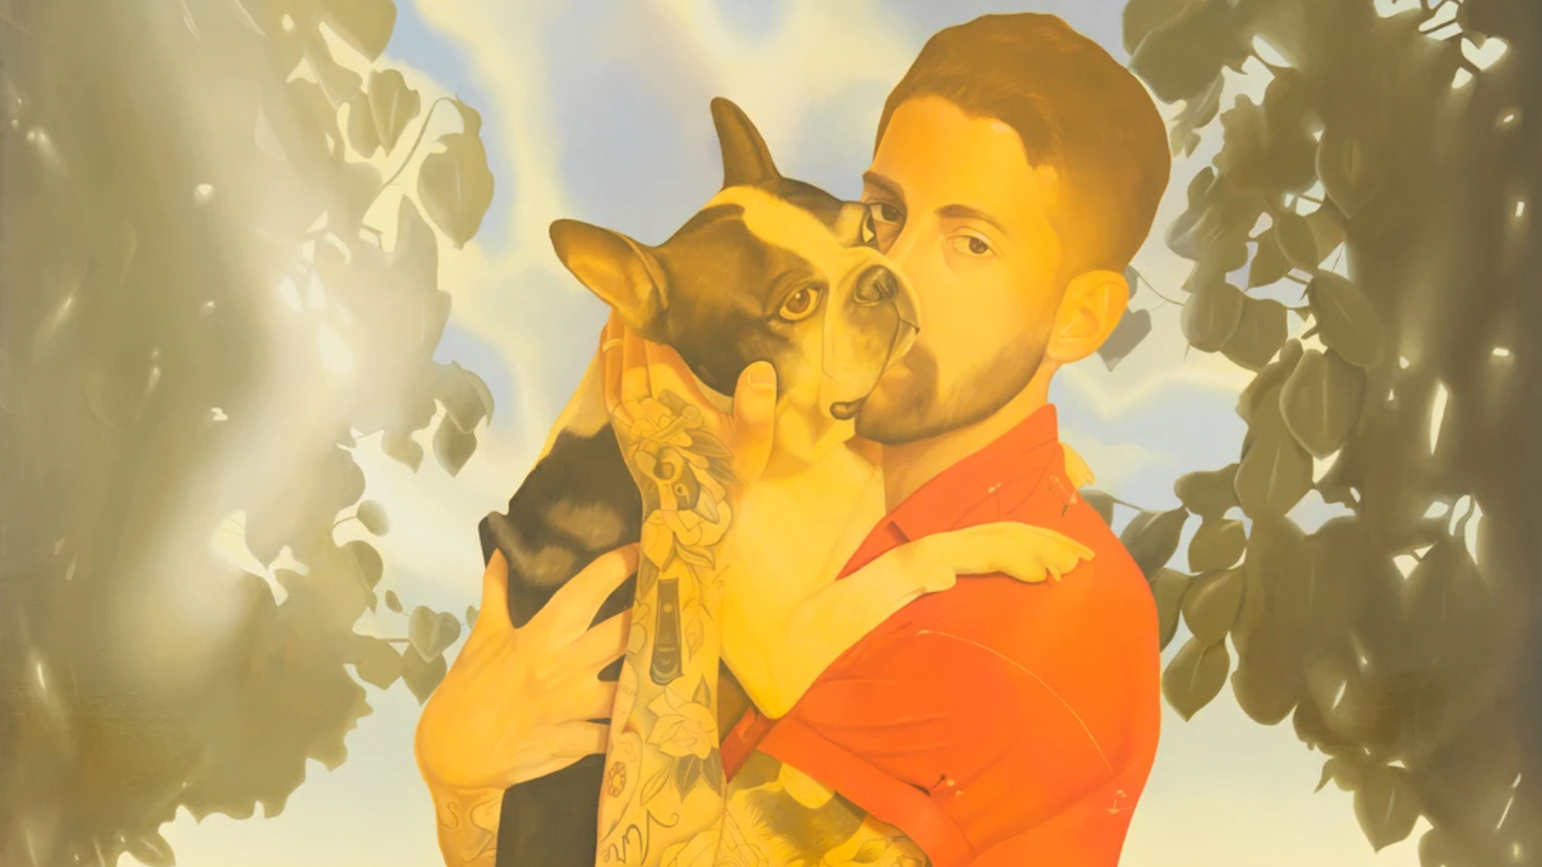 Painting of a man with tattooed arm holding a Boston Terrier